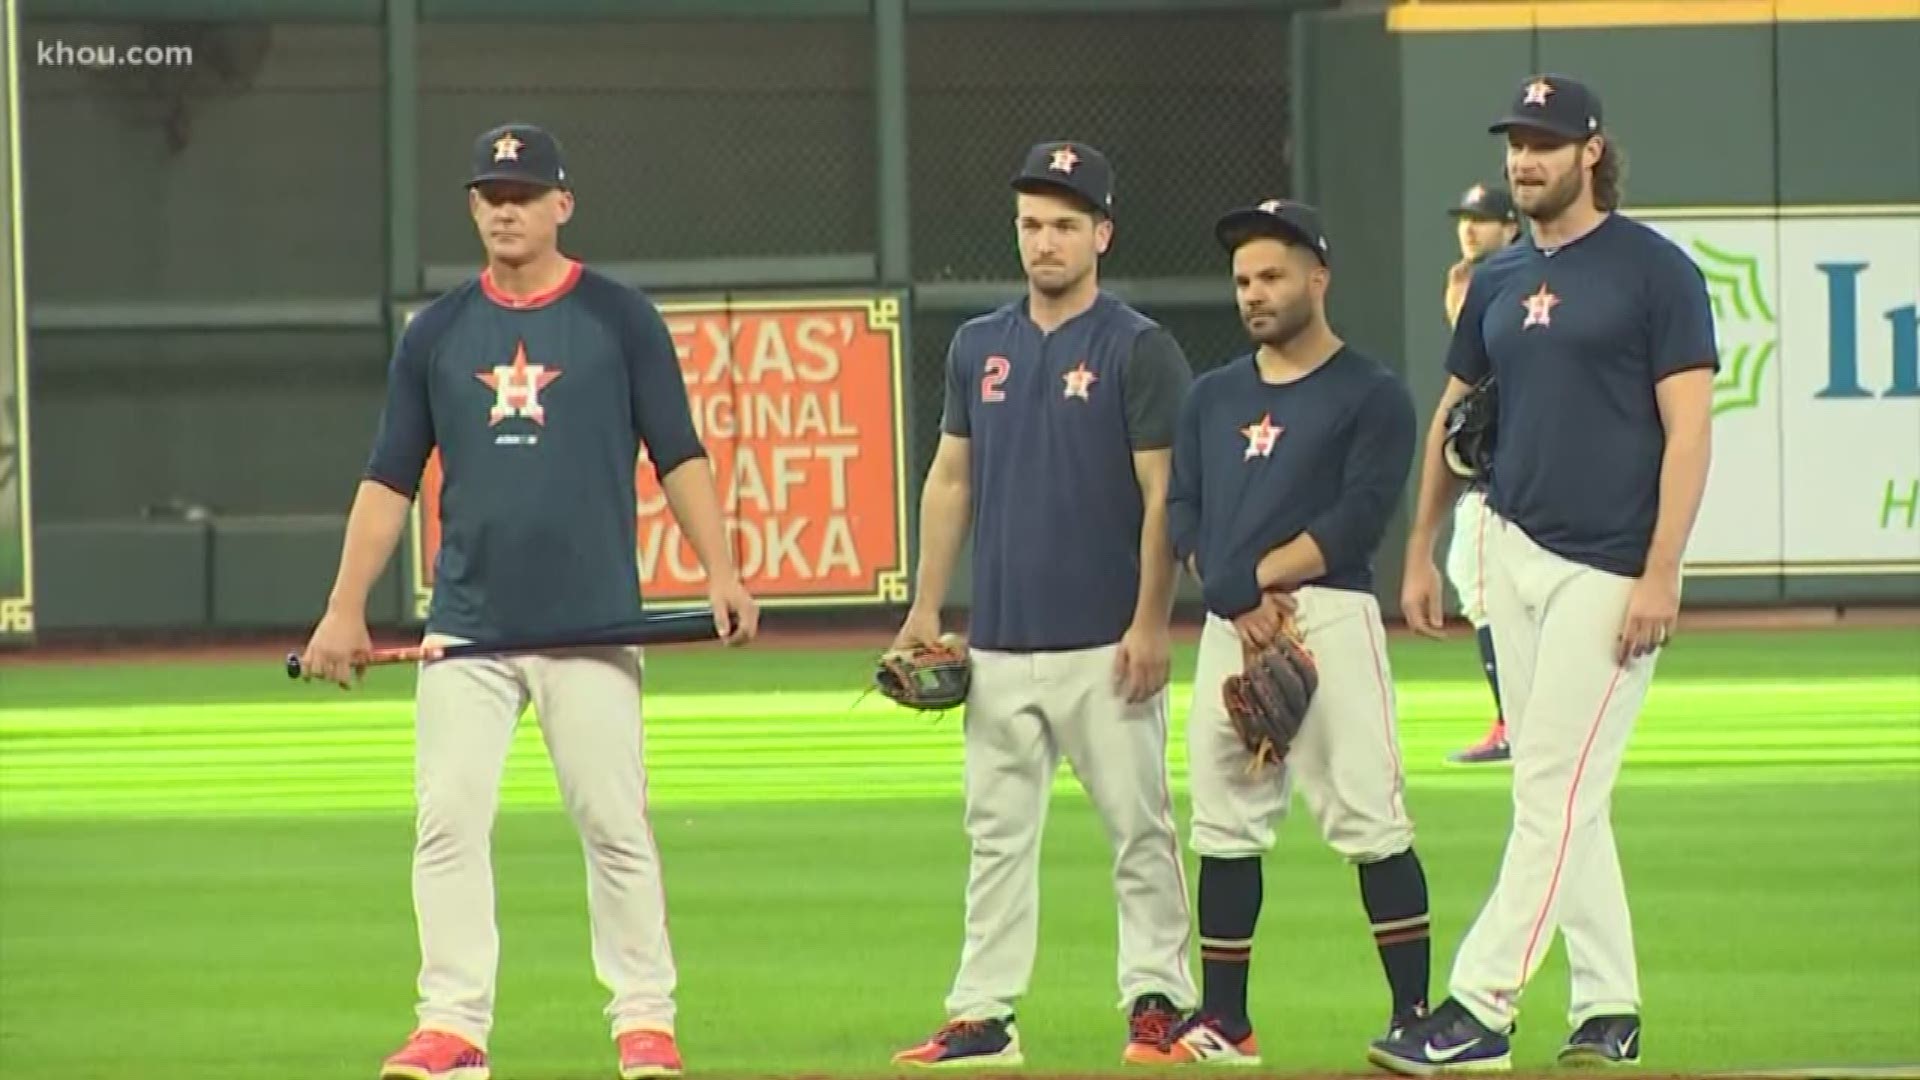 The Houston Astros are ready for Game 6 of the ALCS at home against the New York Yankees.